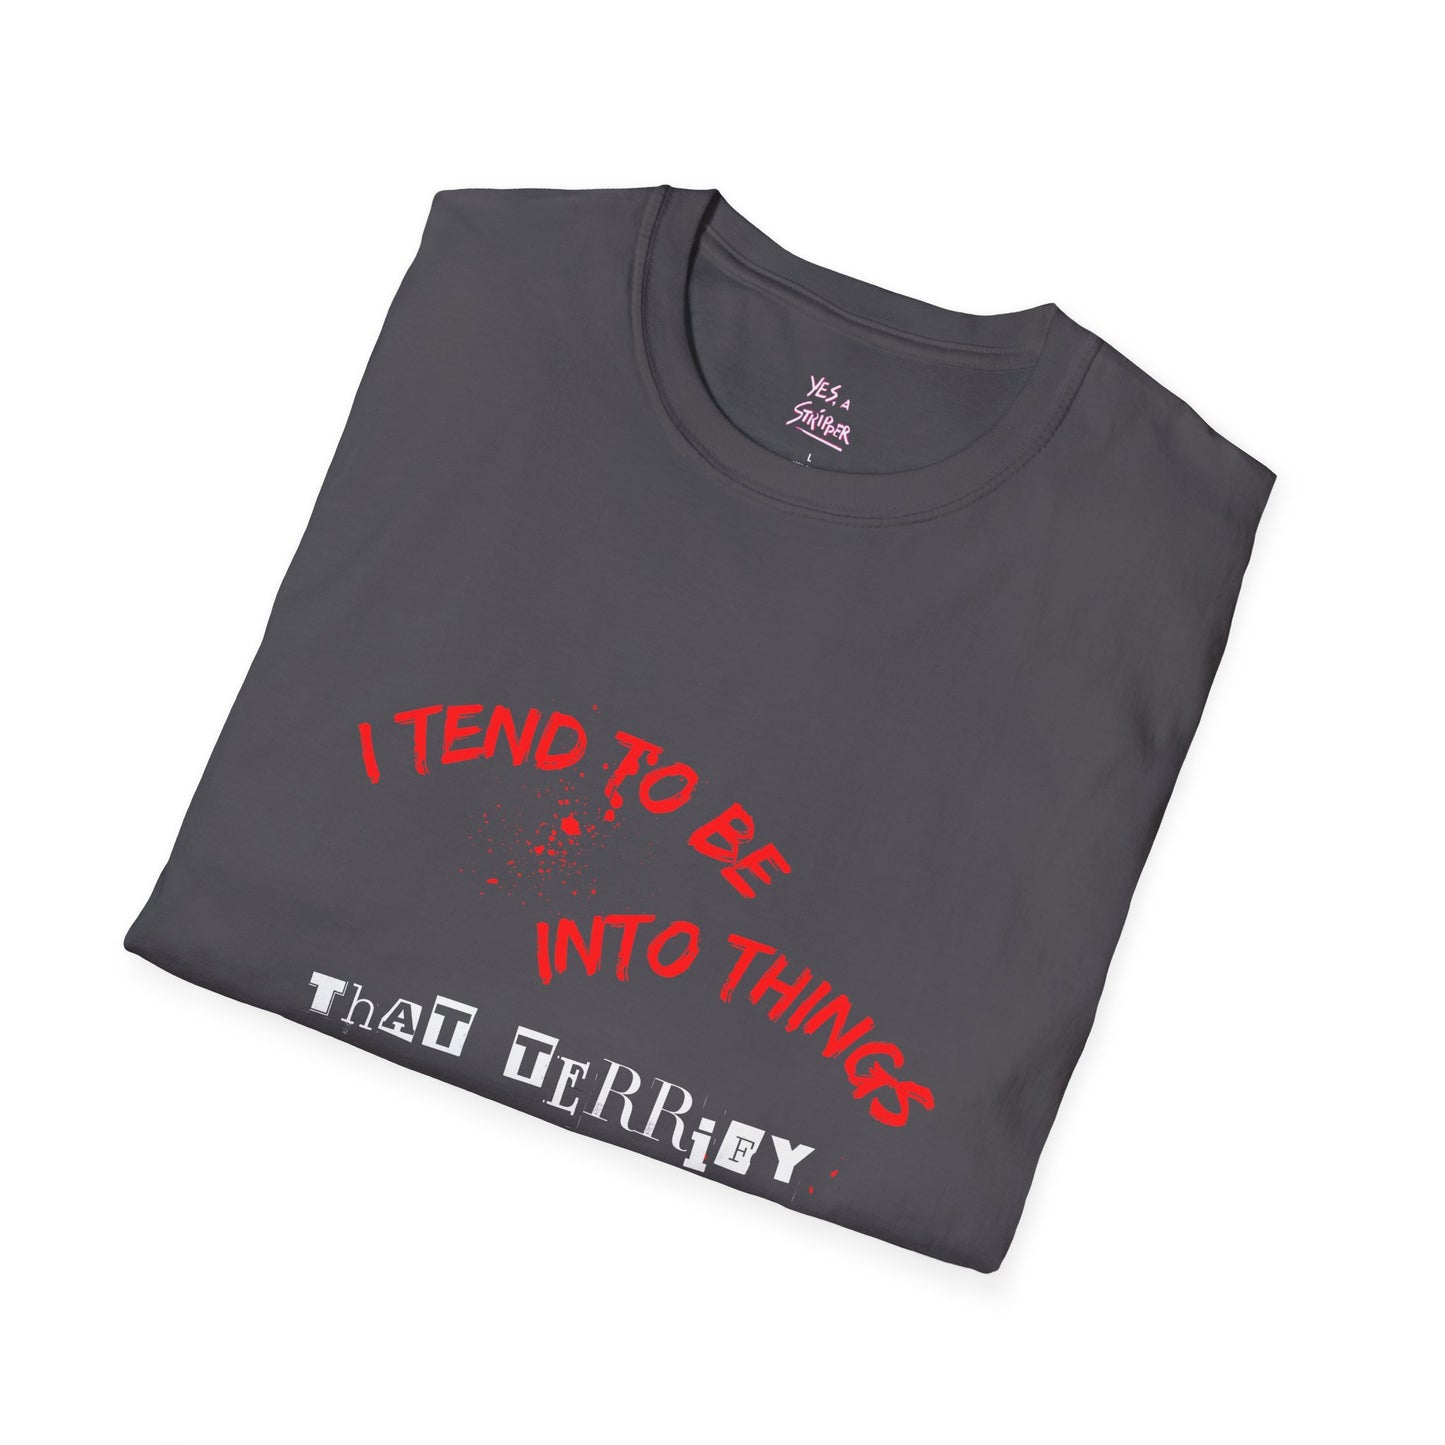 Daisy Ducati Quote  "I Tend to Be Into the Things..." T-Shirt